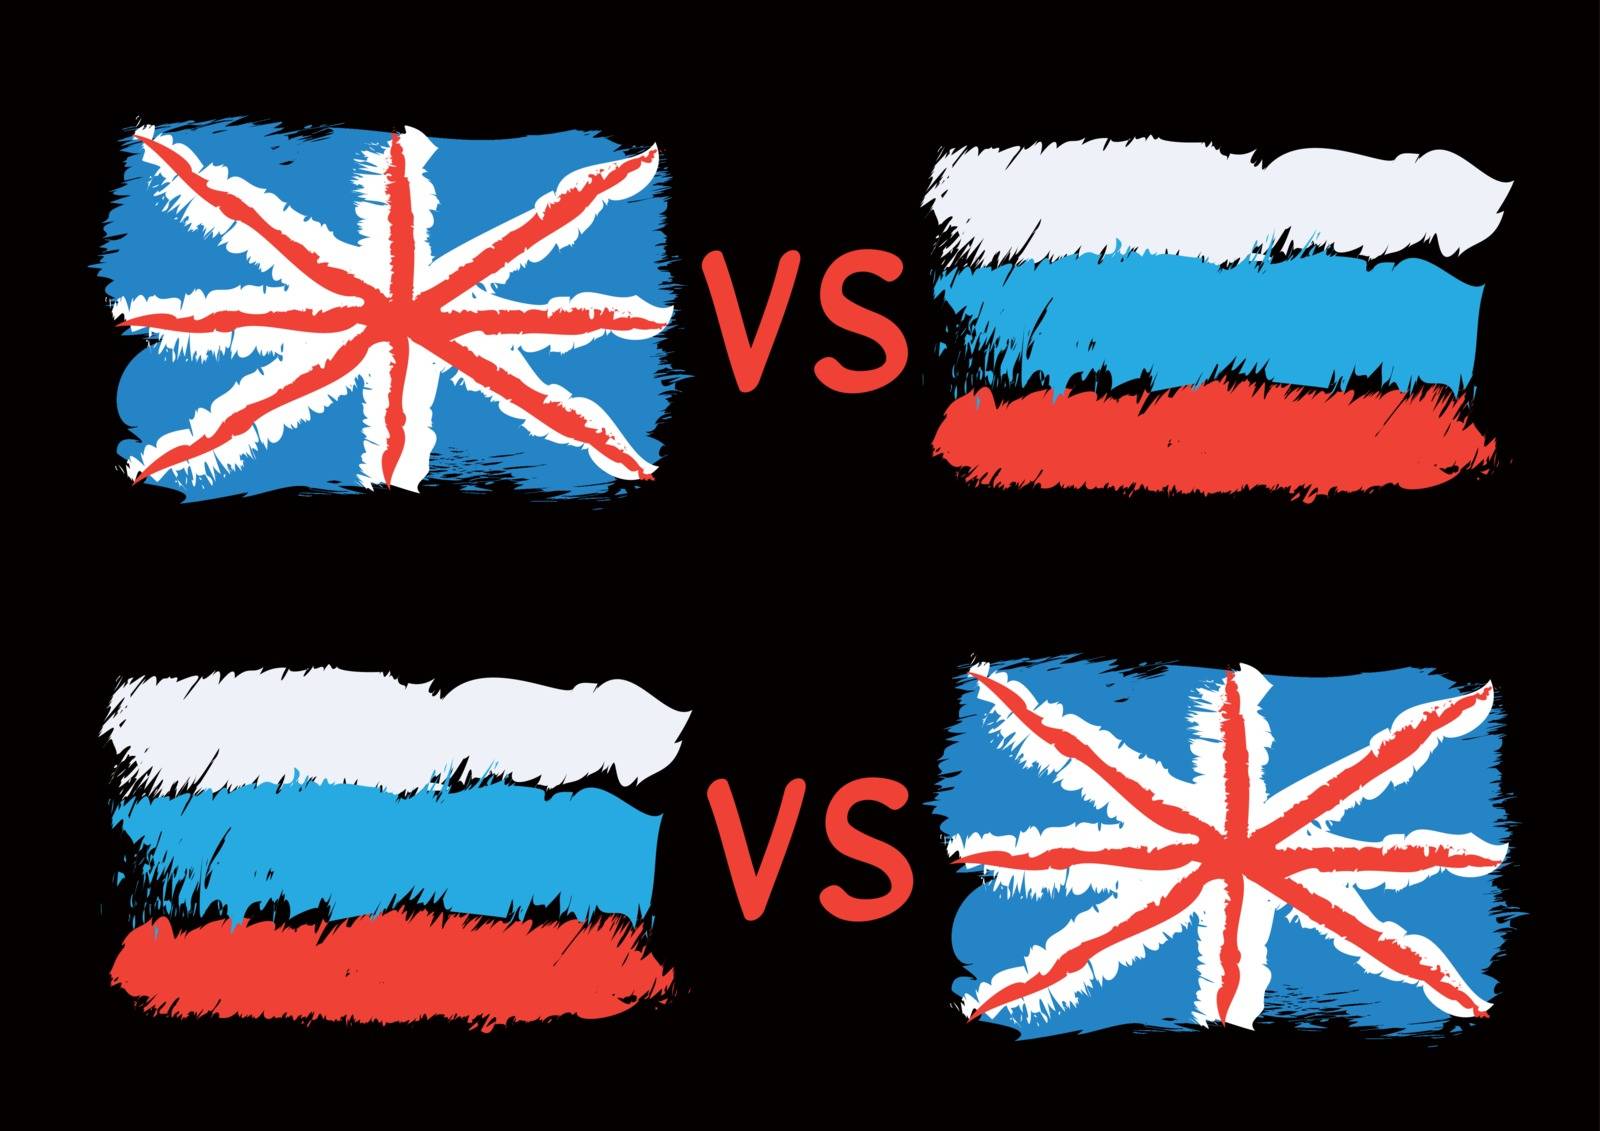 Conflict between Great Britain and Russia. Rectangular flags on dark background. Cold war illustration